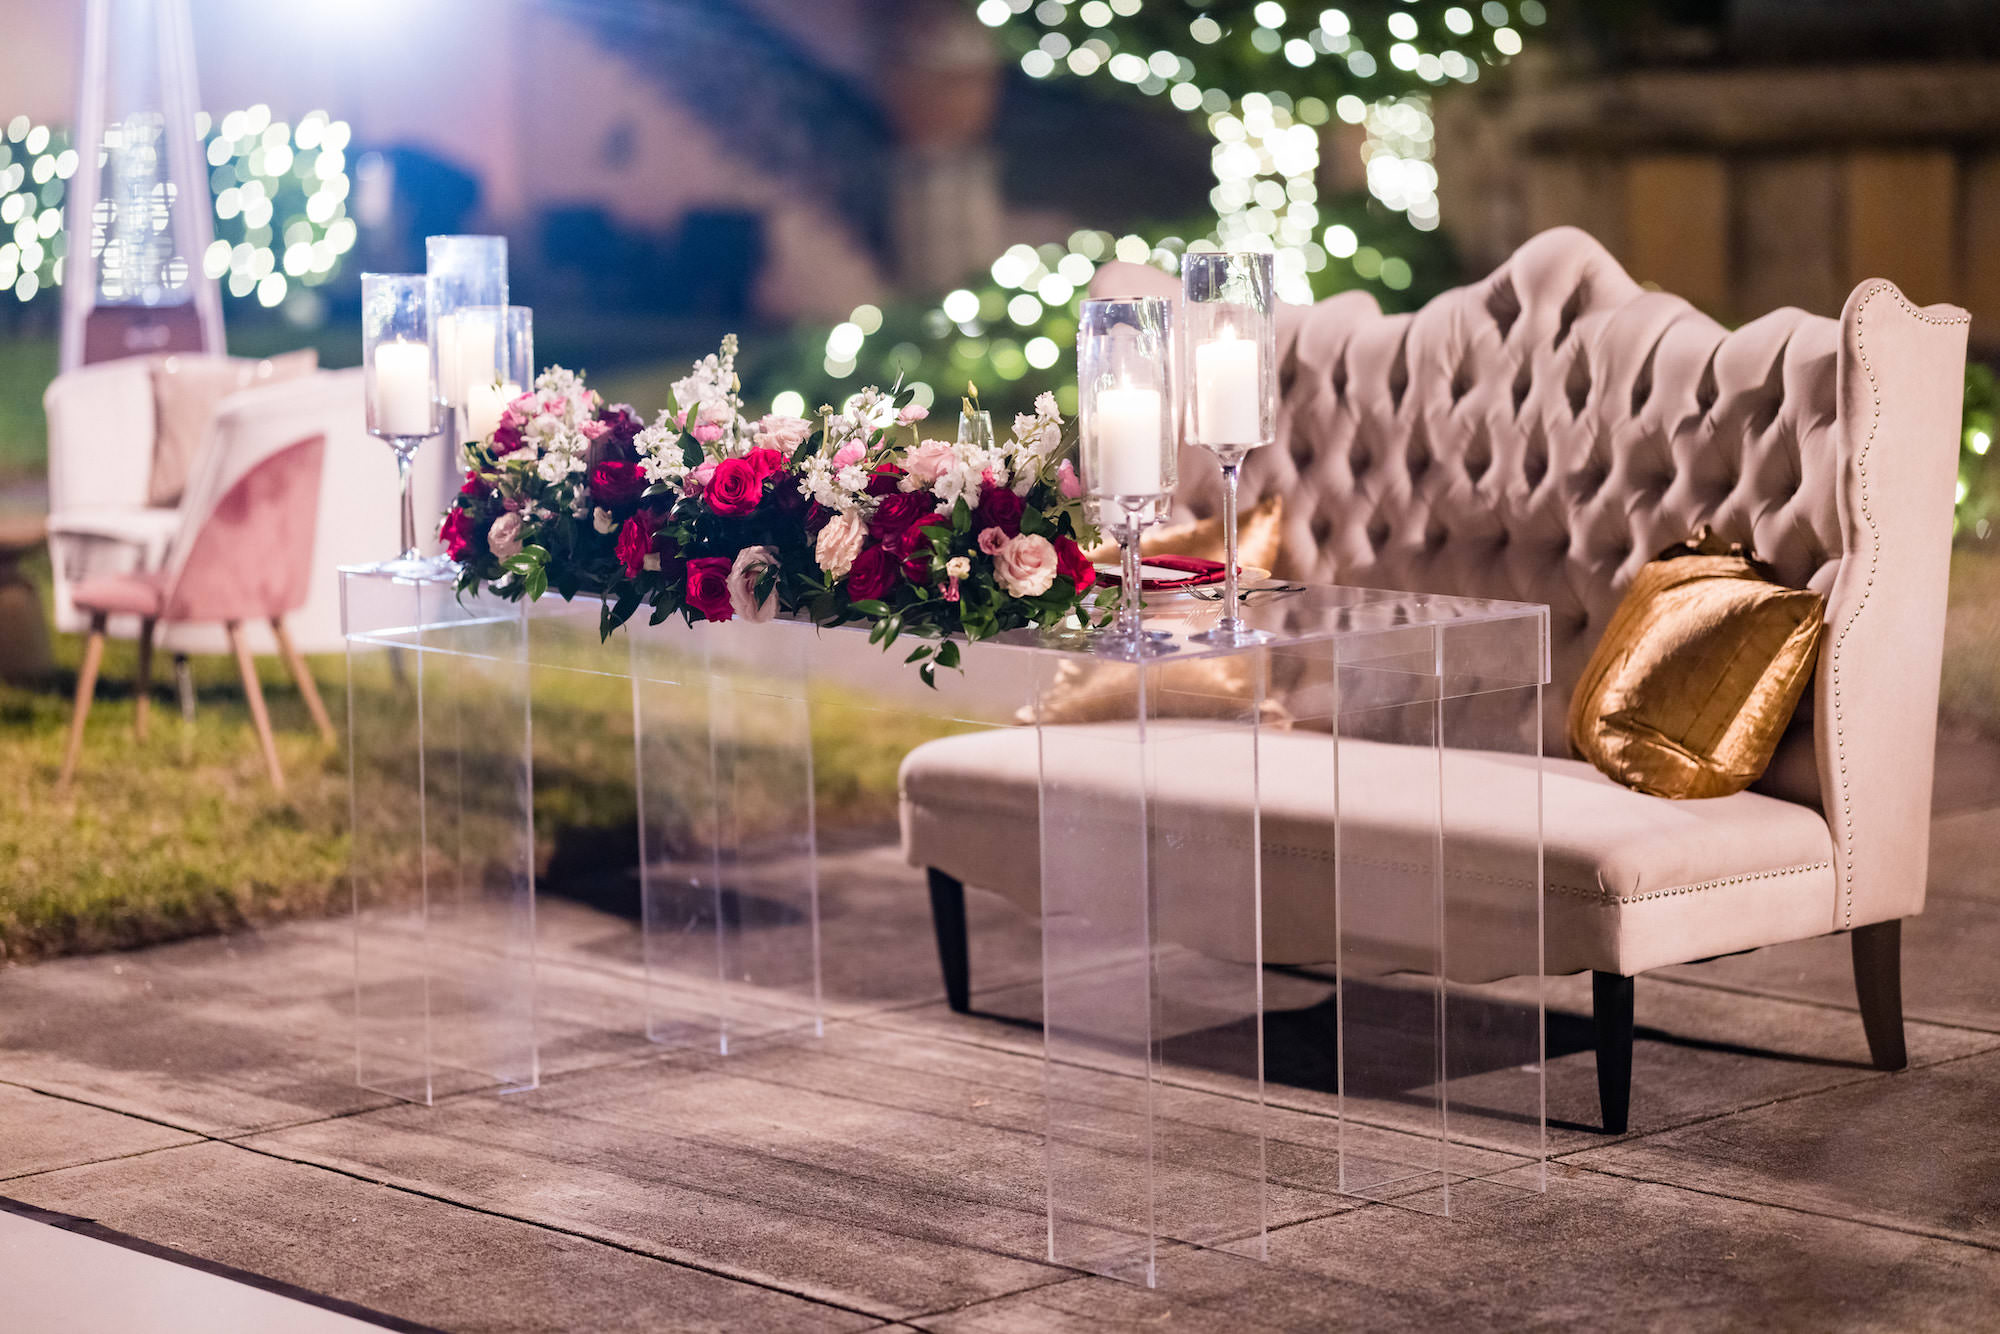 Acrylic Sweetheart Table | Tufted Loveseat | Pink, White, and Burgundy Rose Table Flower Arrangements | Sarasota Wedding Florist FH Events